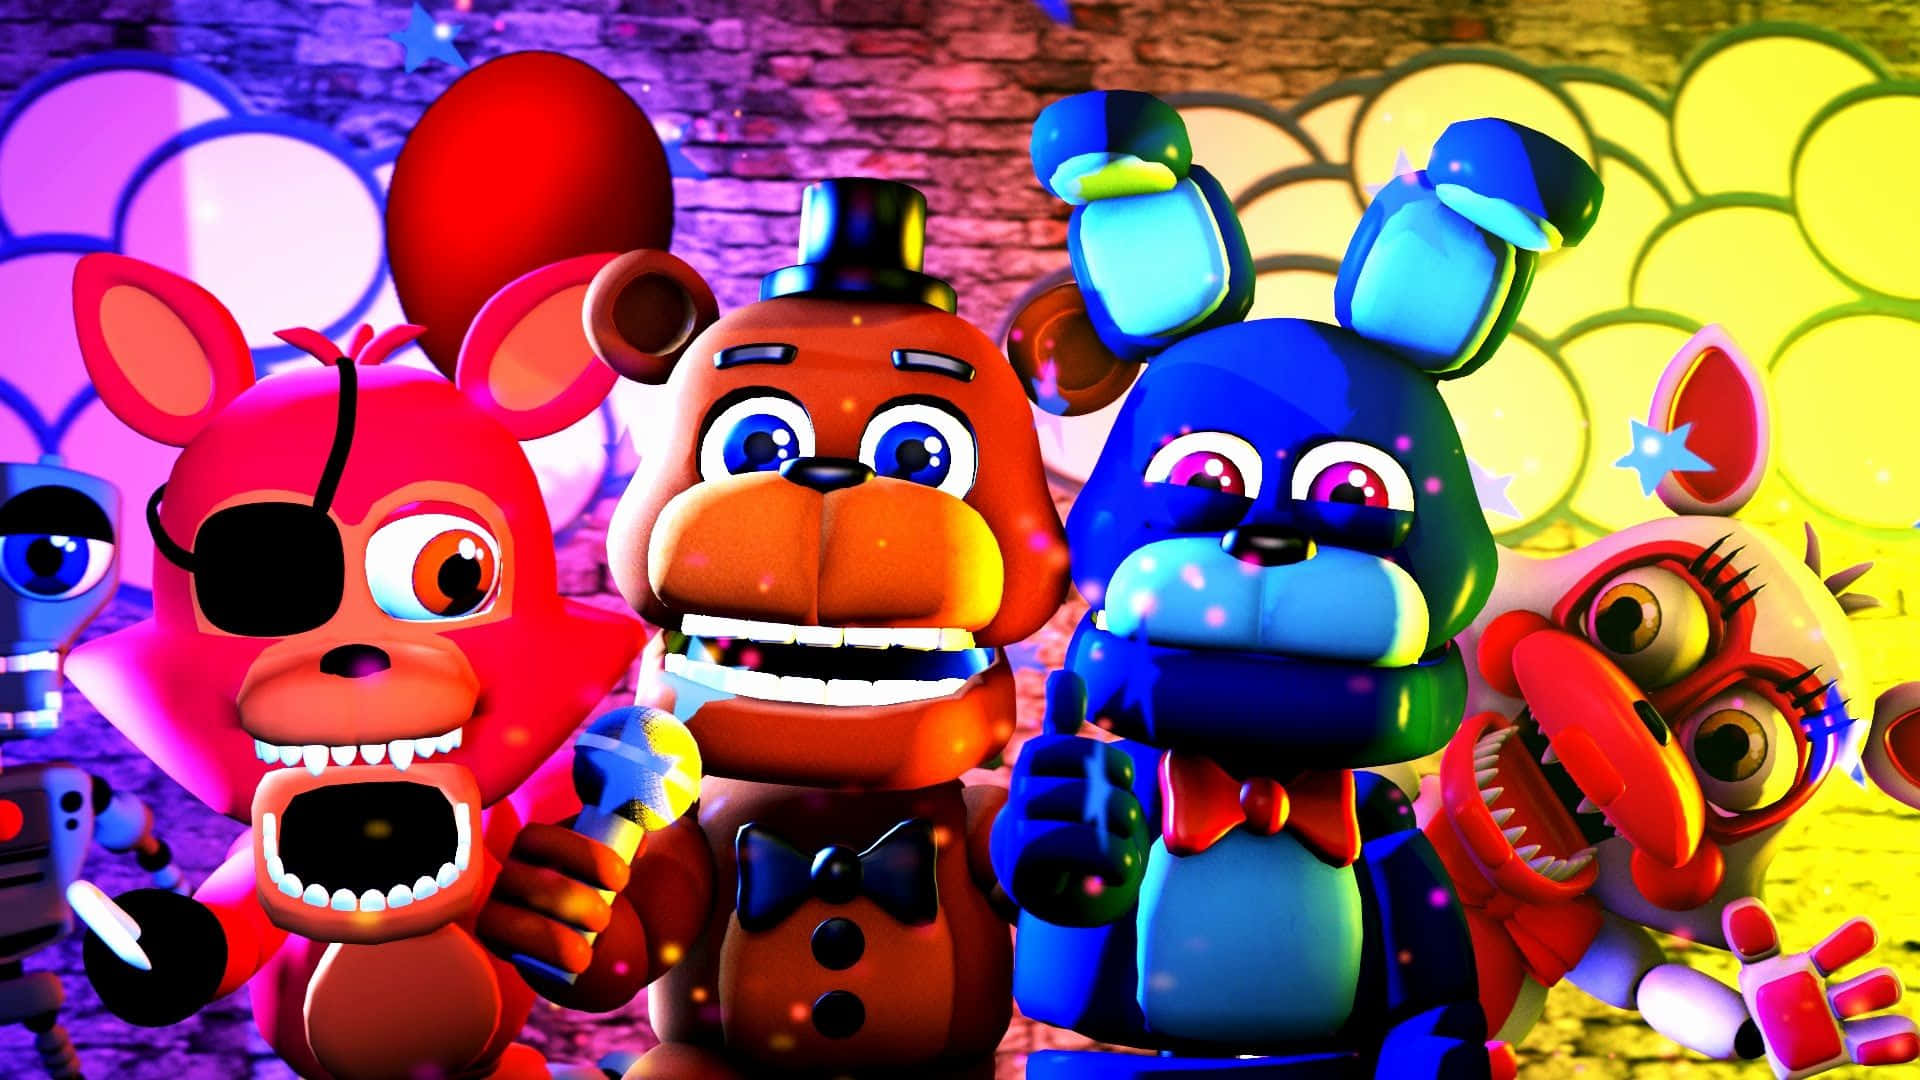 Bring The Fun Into Five Night's At Freddy's With These Cute Fnaf Characters! Background